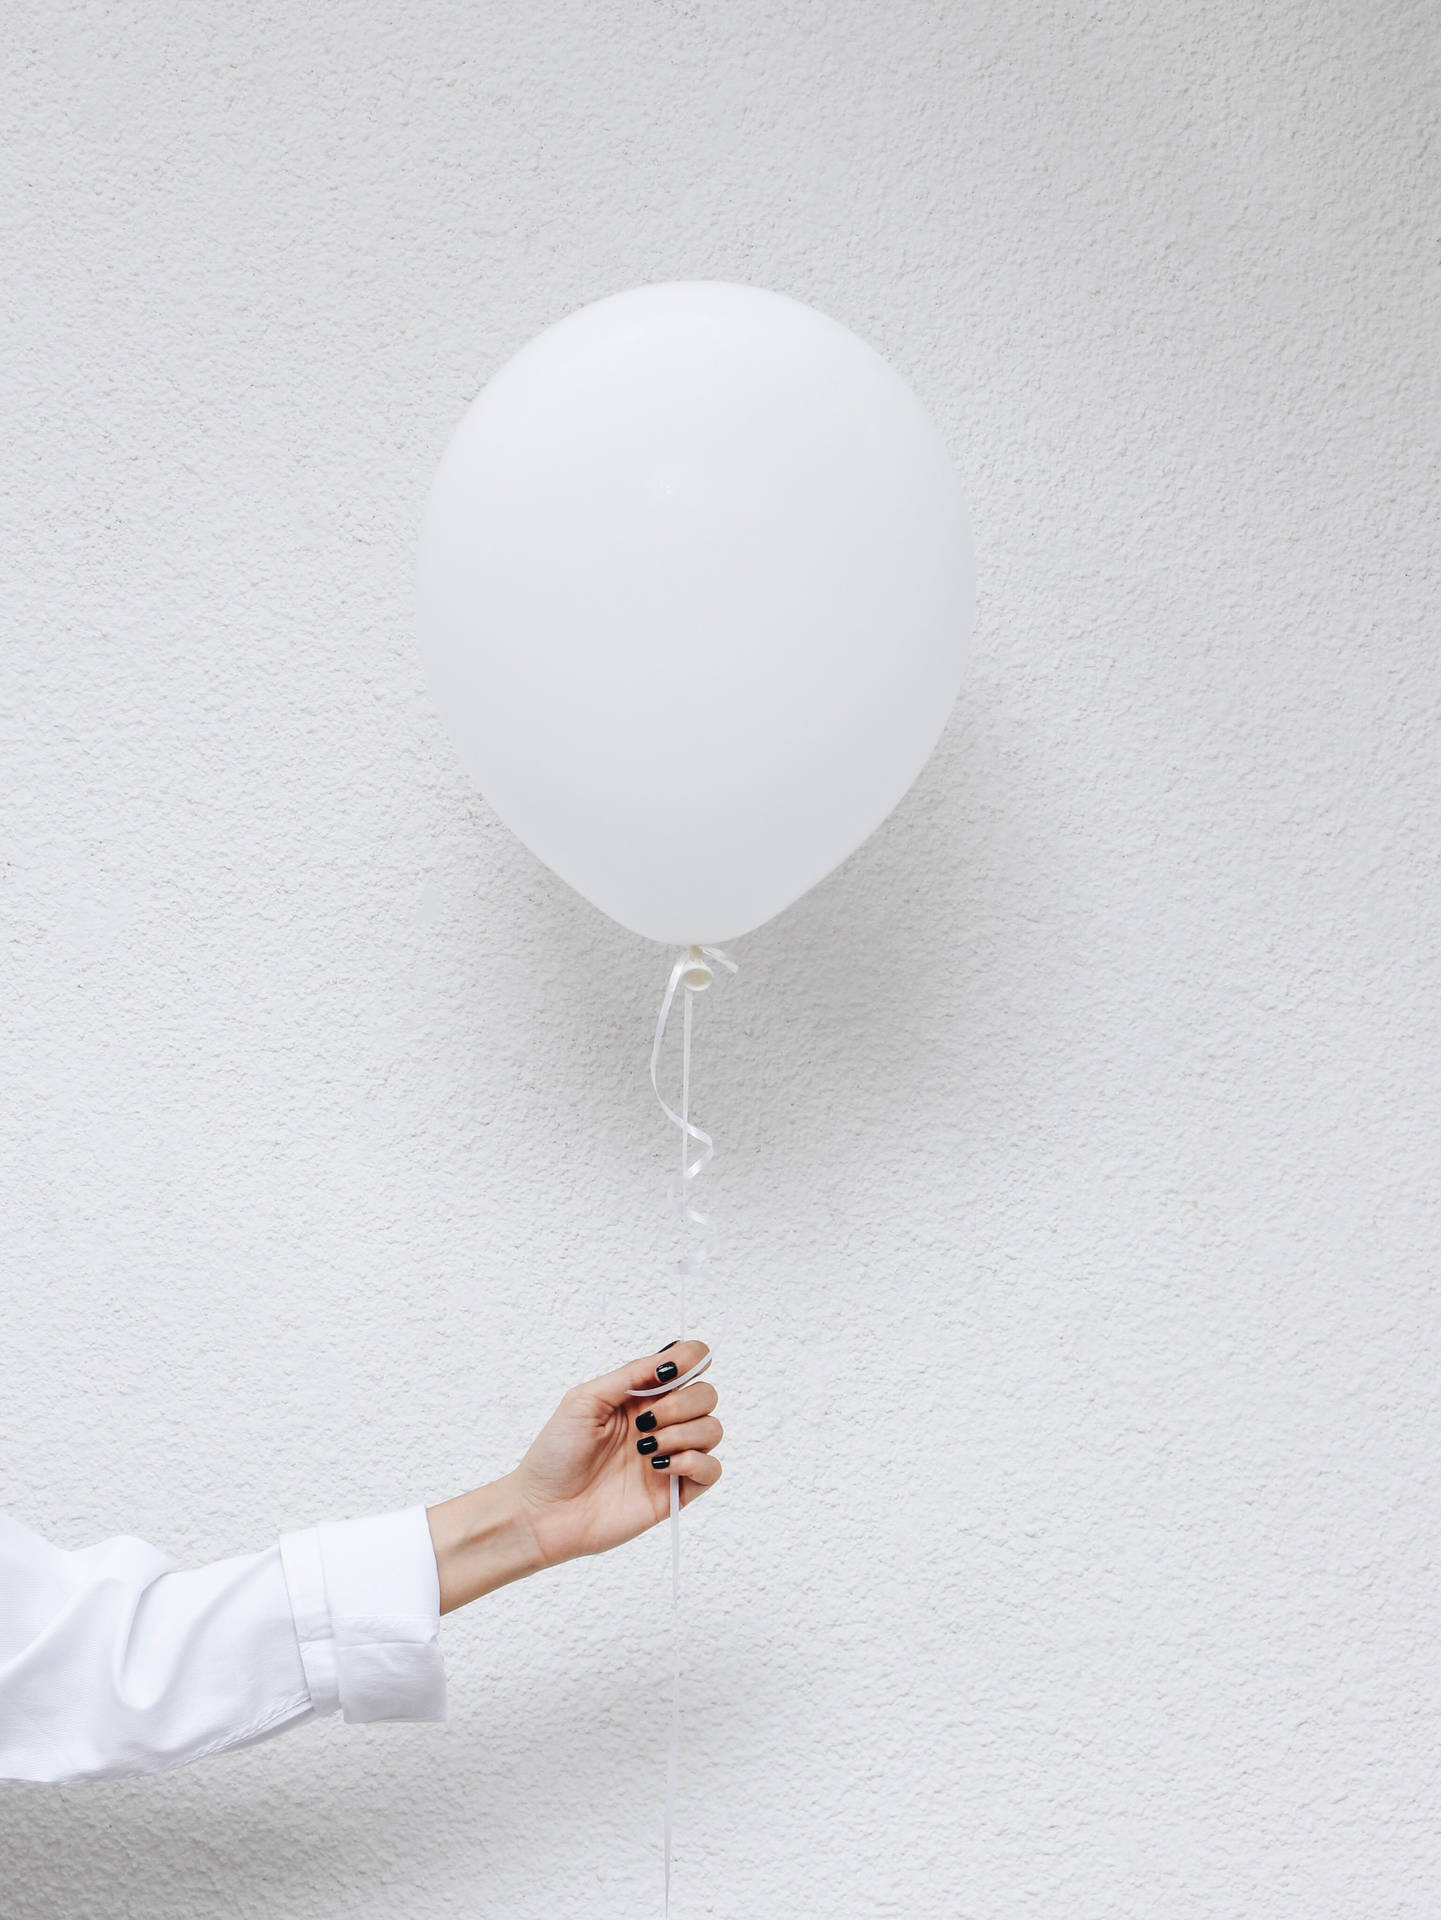 Balloon In White Aesthetic Background